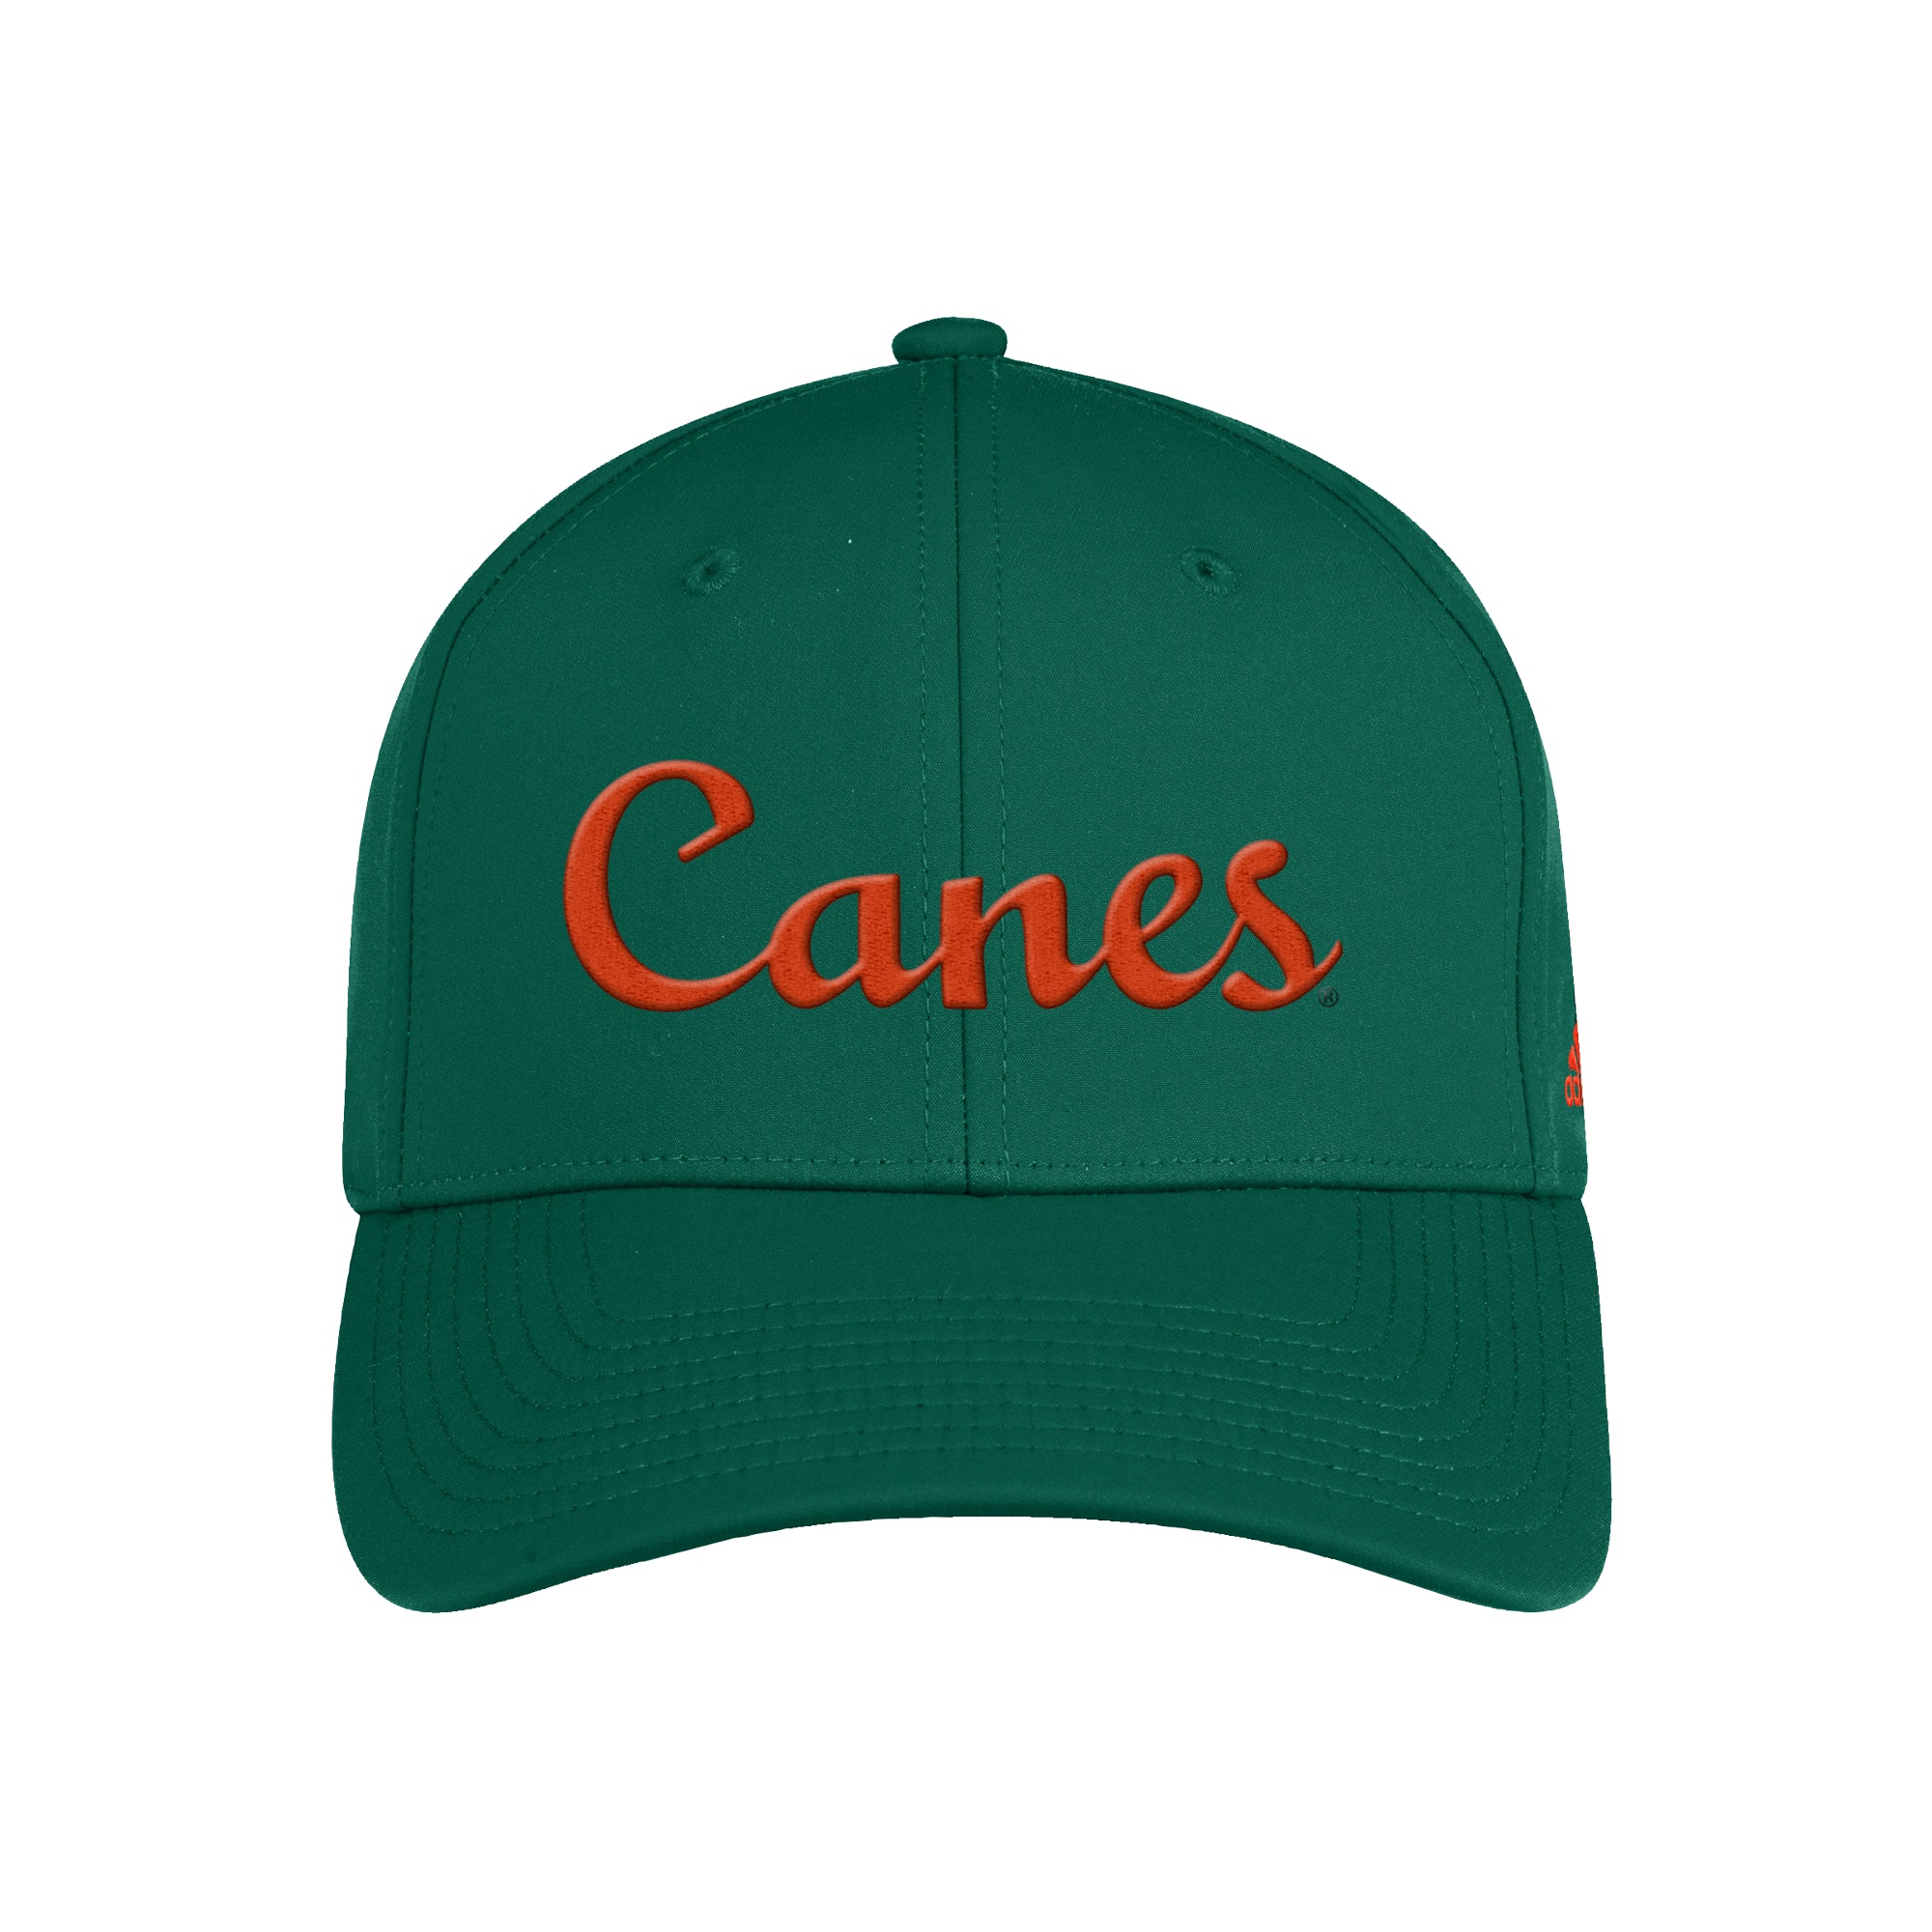 Miami Hurricanes adidas 'Canes' Stretch Fit Hat - Green